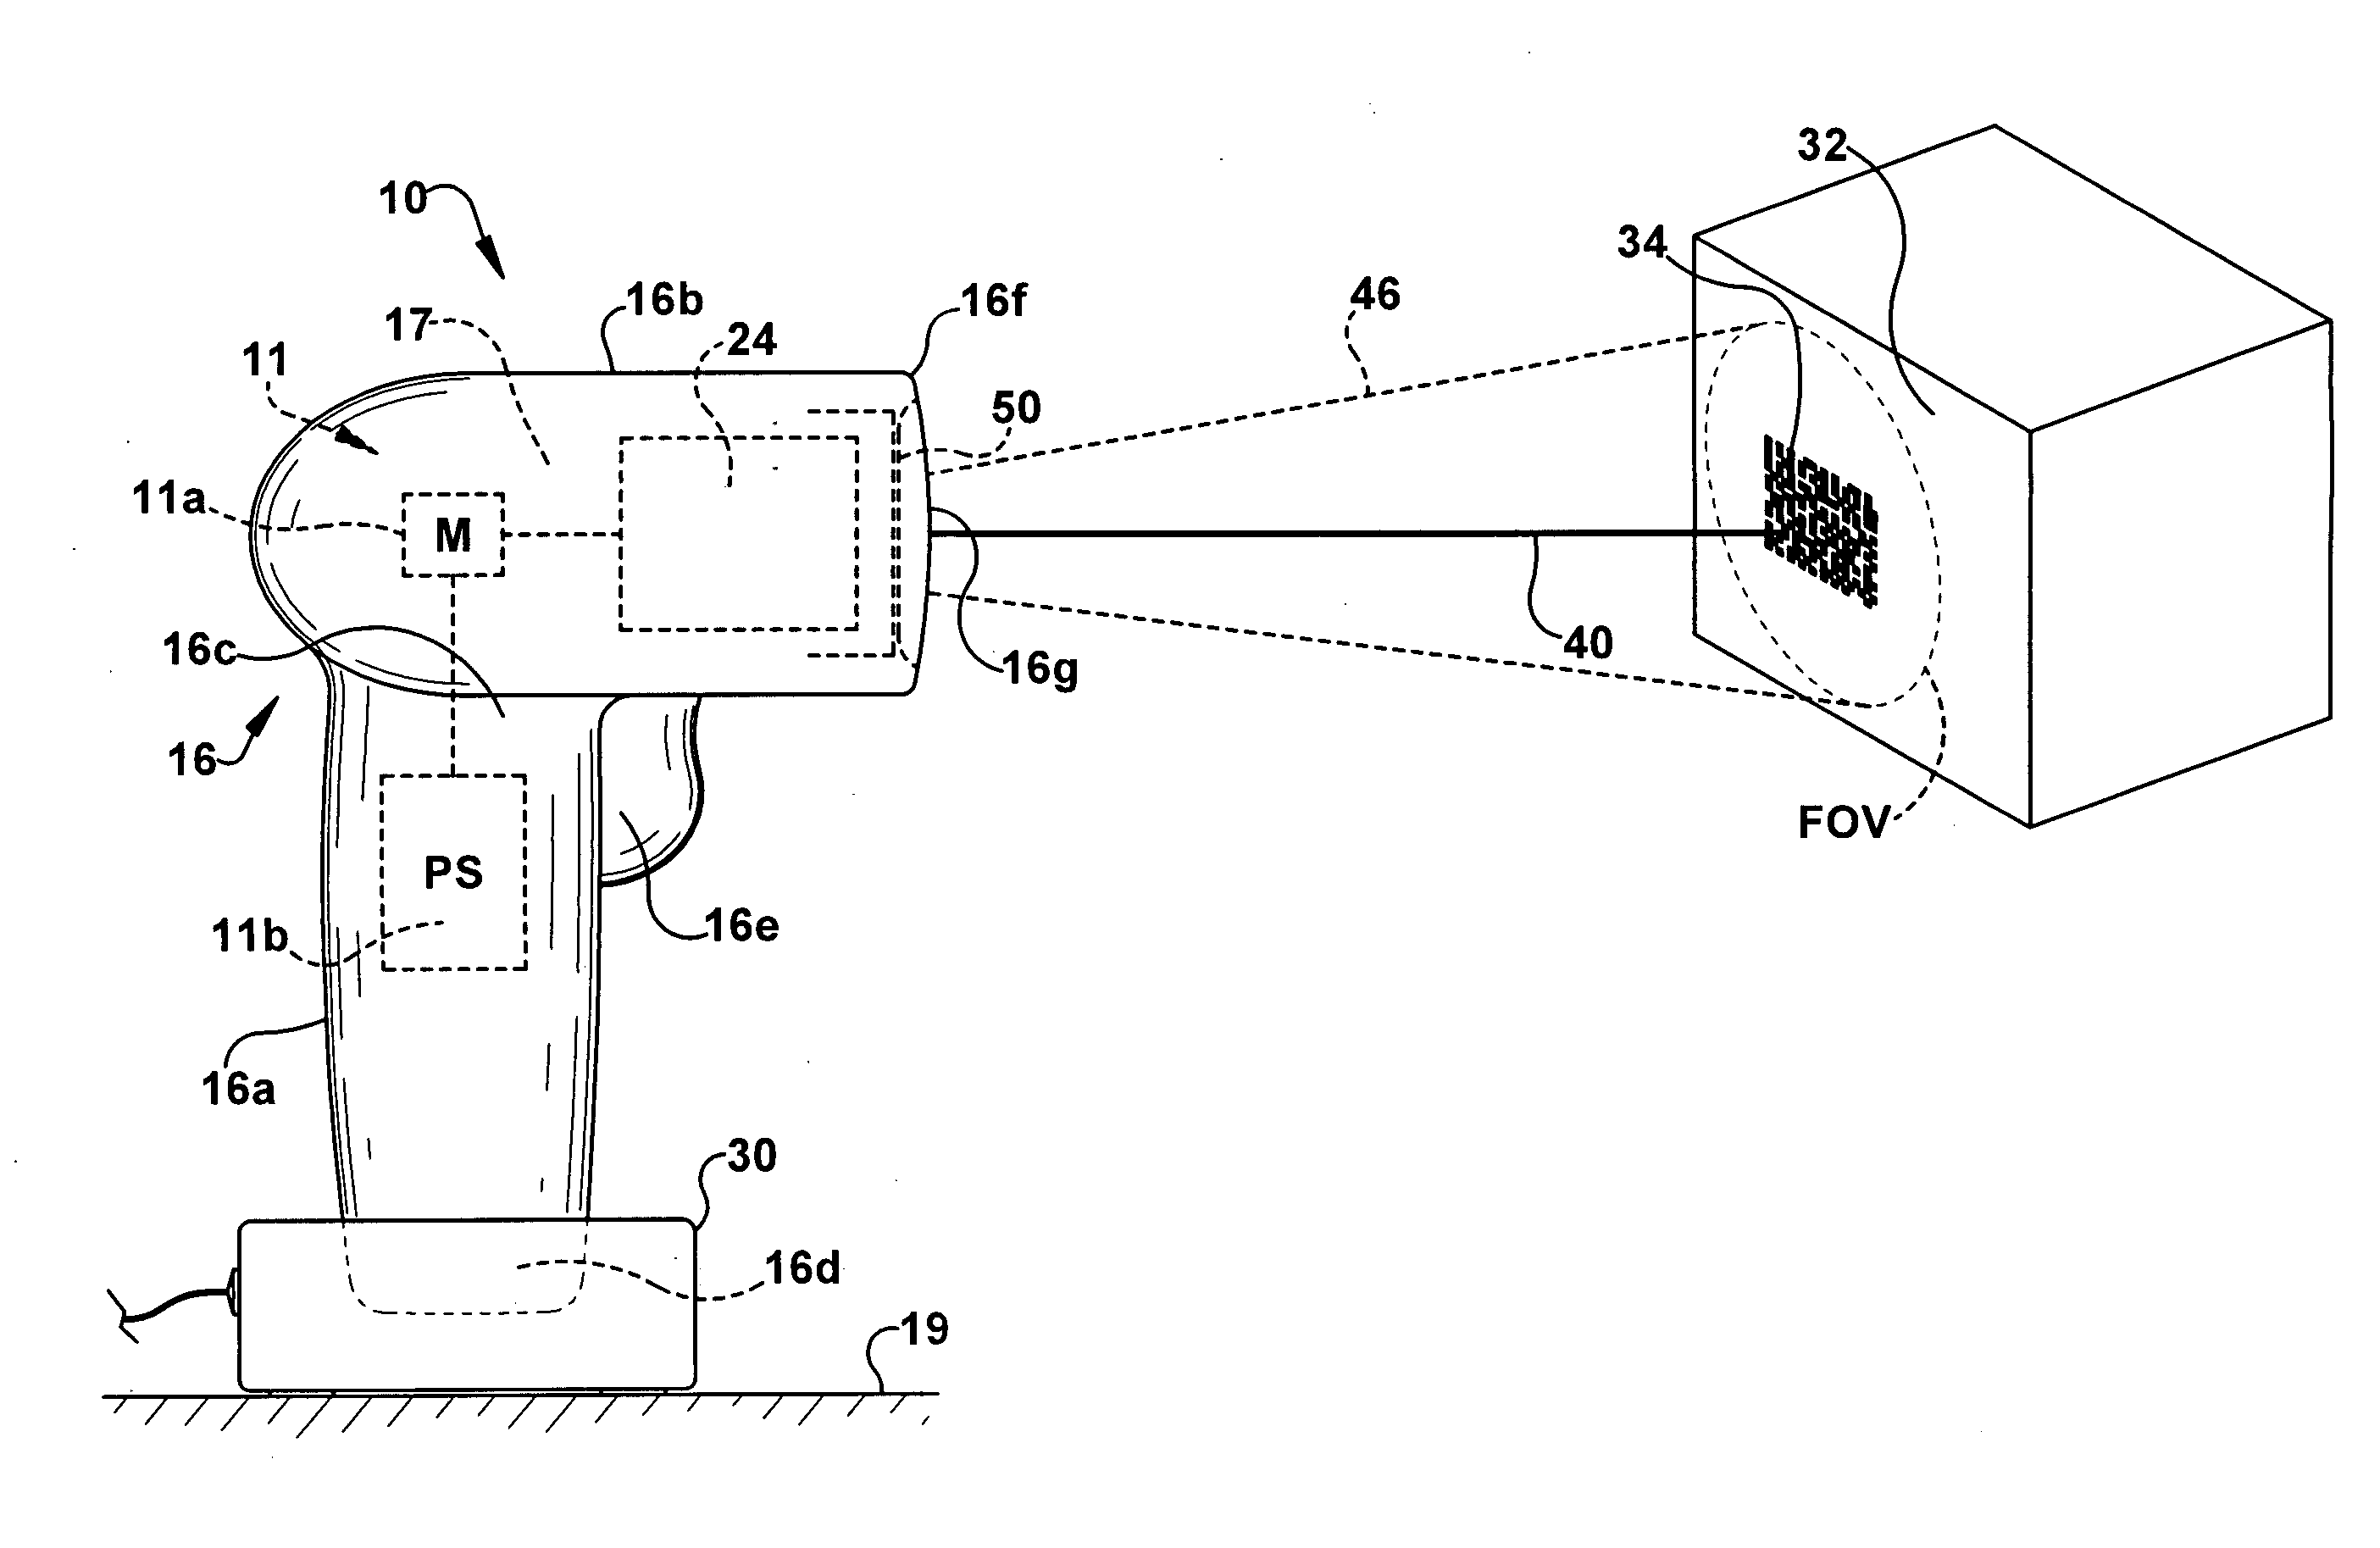 Illumination system including a curved mirror for an imaging-based bar code reader